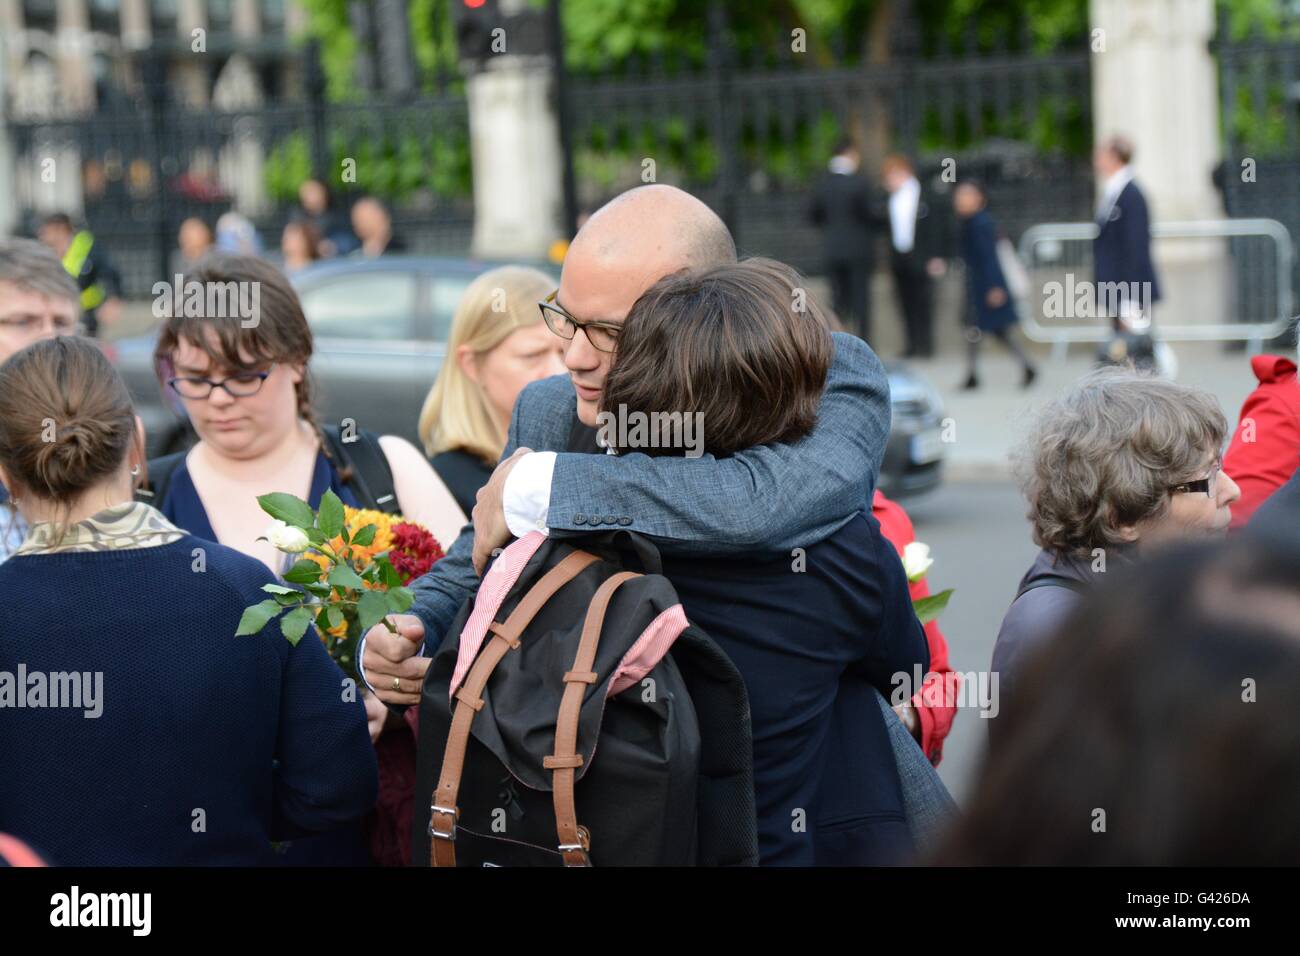 London, England. 17 June 2016. Hugs as people gather in memory of the slain Labour MP Jo Cox. Credit: Marc Ward/Alamy Live News Stock Photo